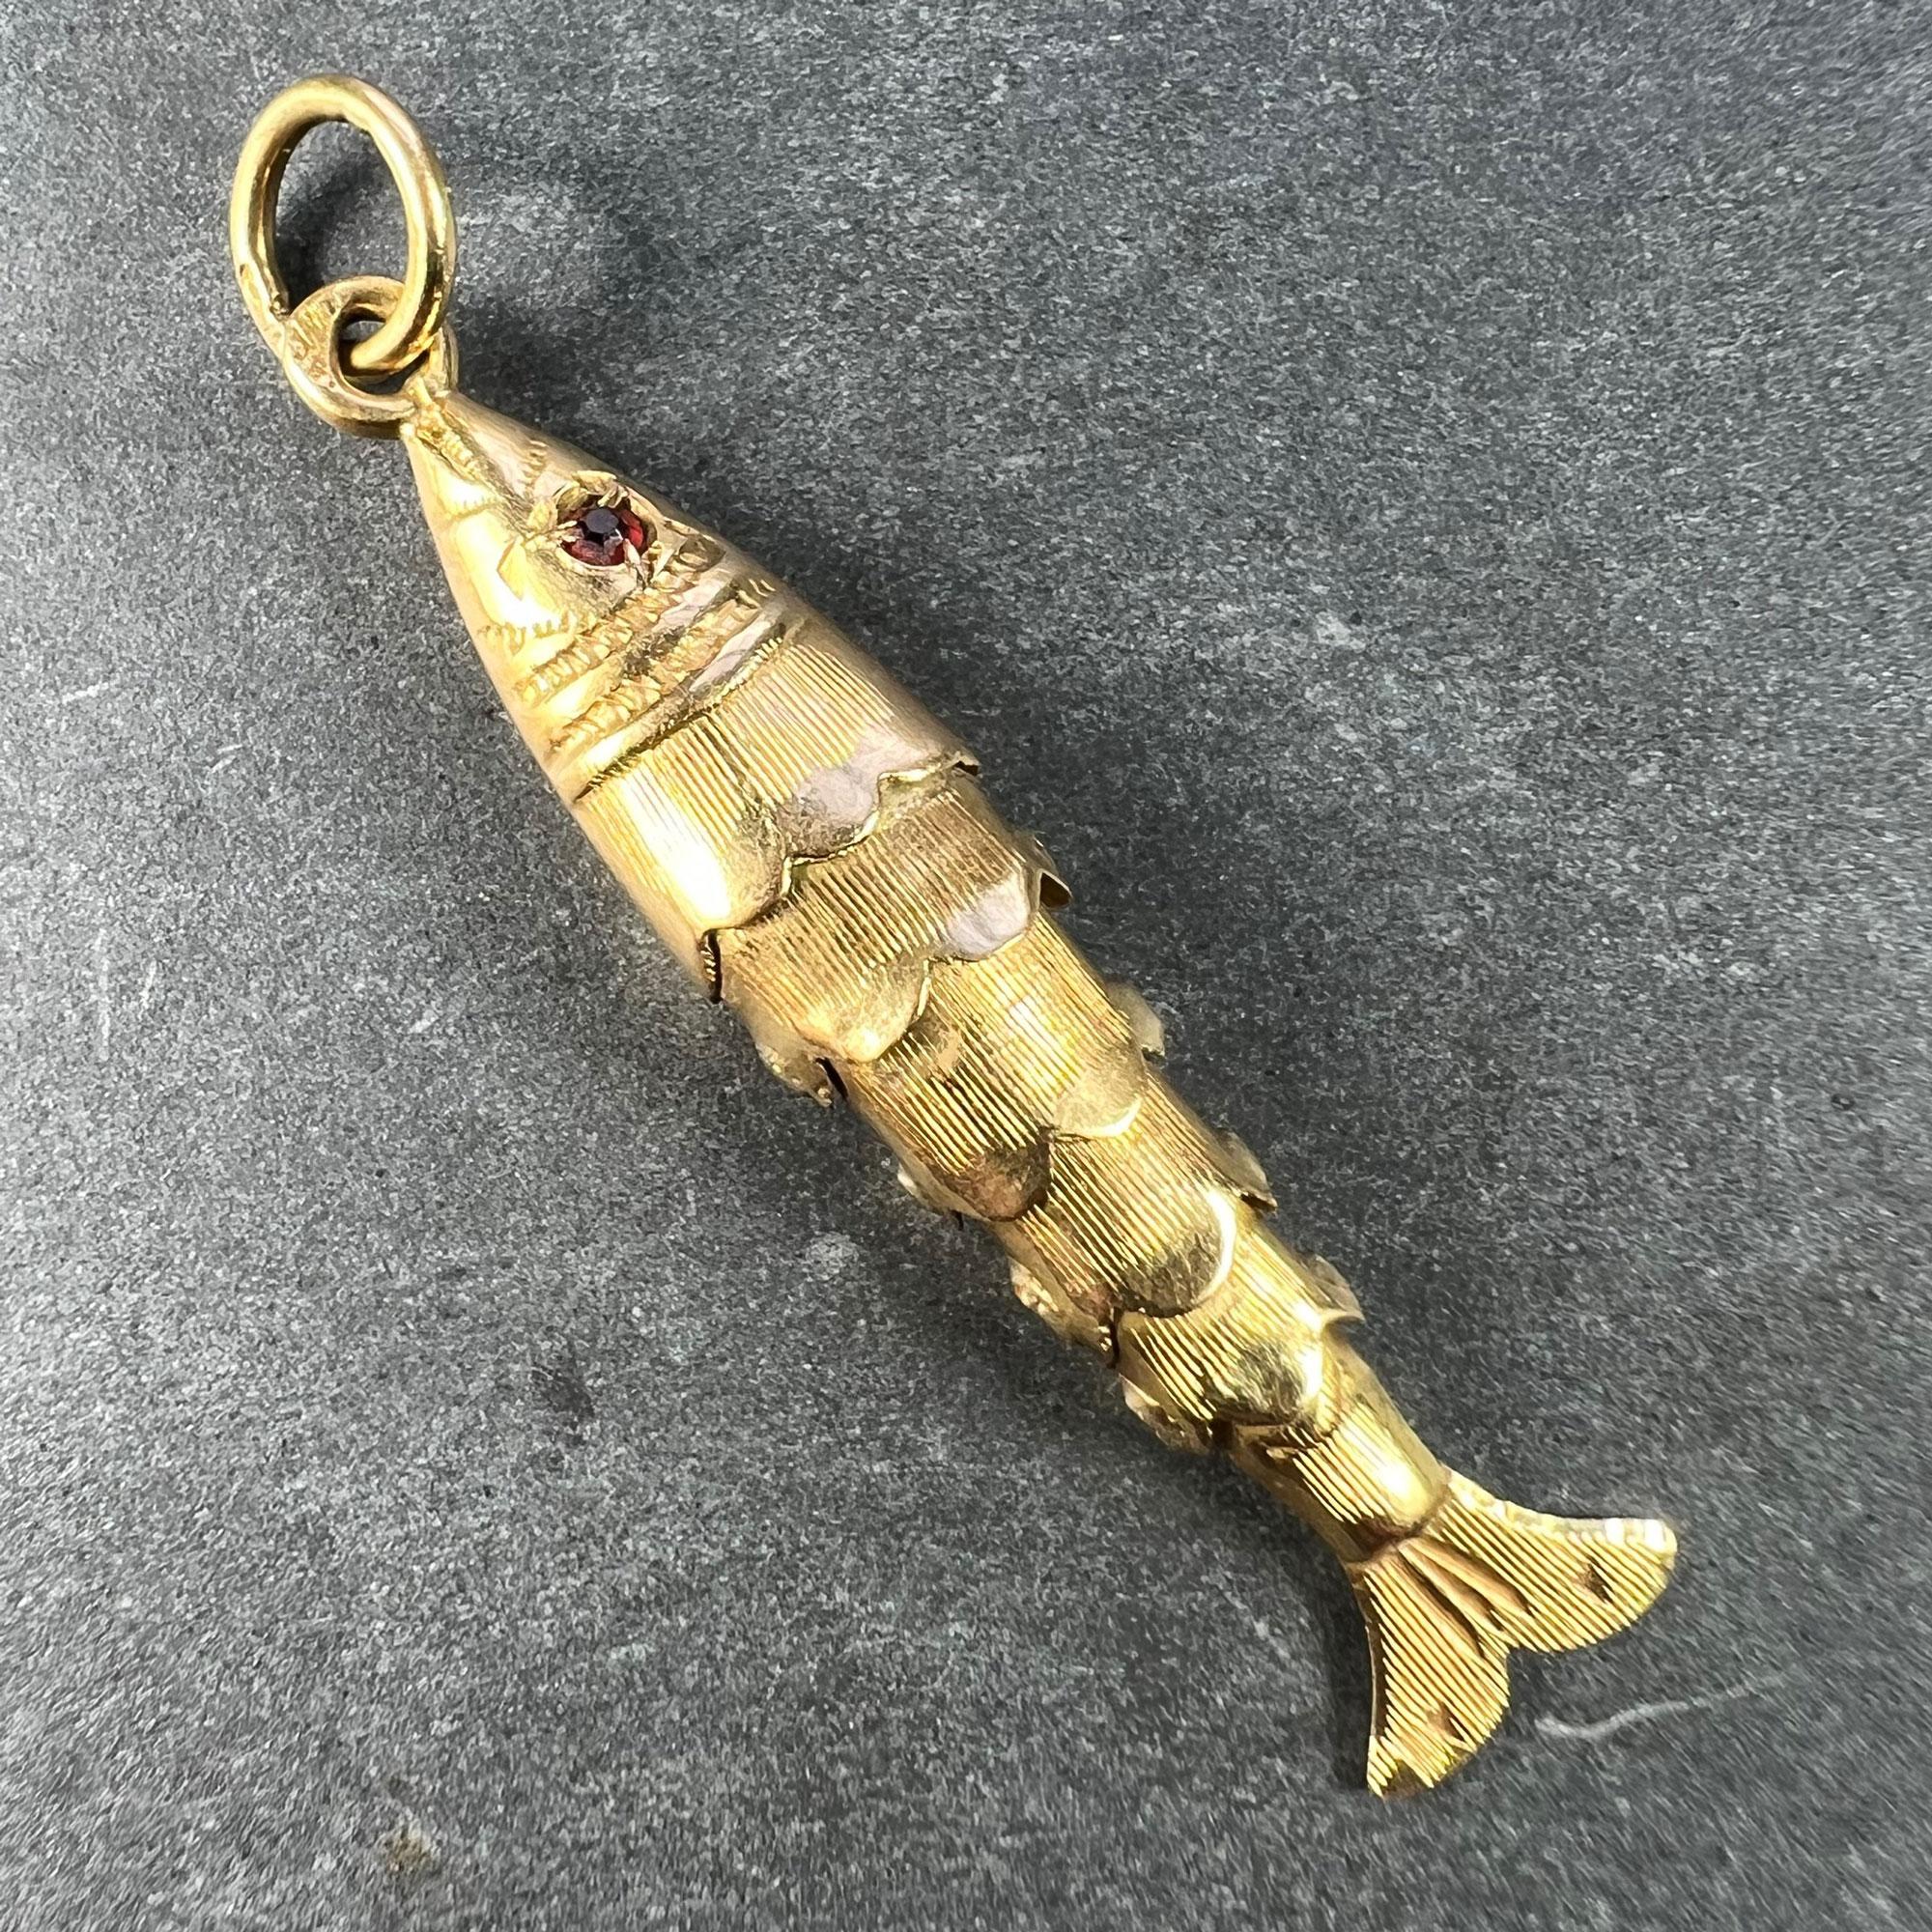 An 18 karat (18K) yellow gold charm pendant designed as an engraved articulated fish with moving body and tail, the eyes each set with a round cut red paste stone. Stamped with a French import head for 18 karat gold.

Dimensions: 3 x 0.7 x 0.45 cm